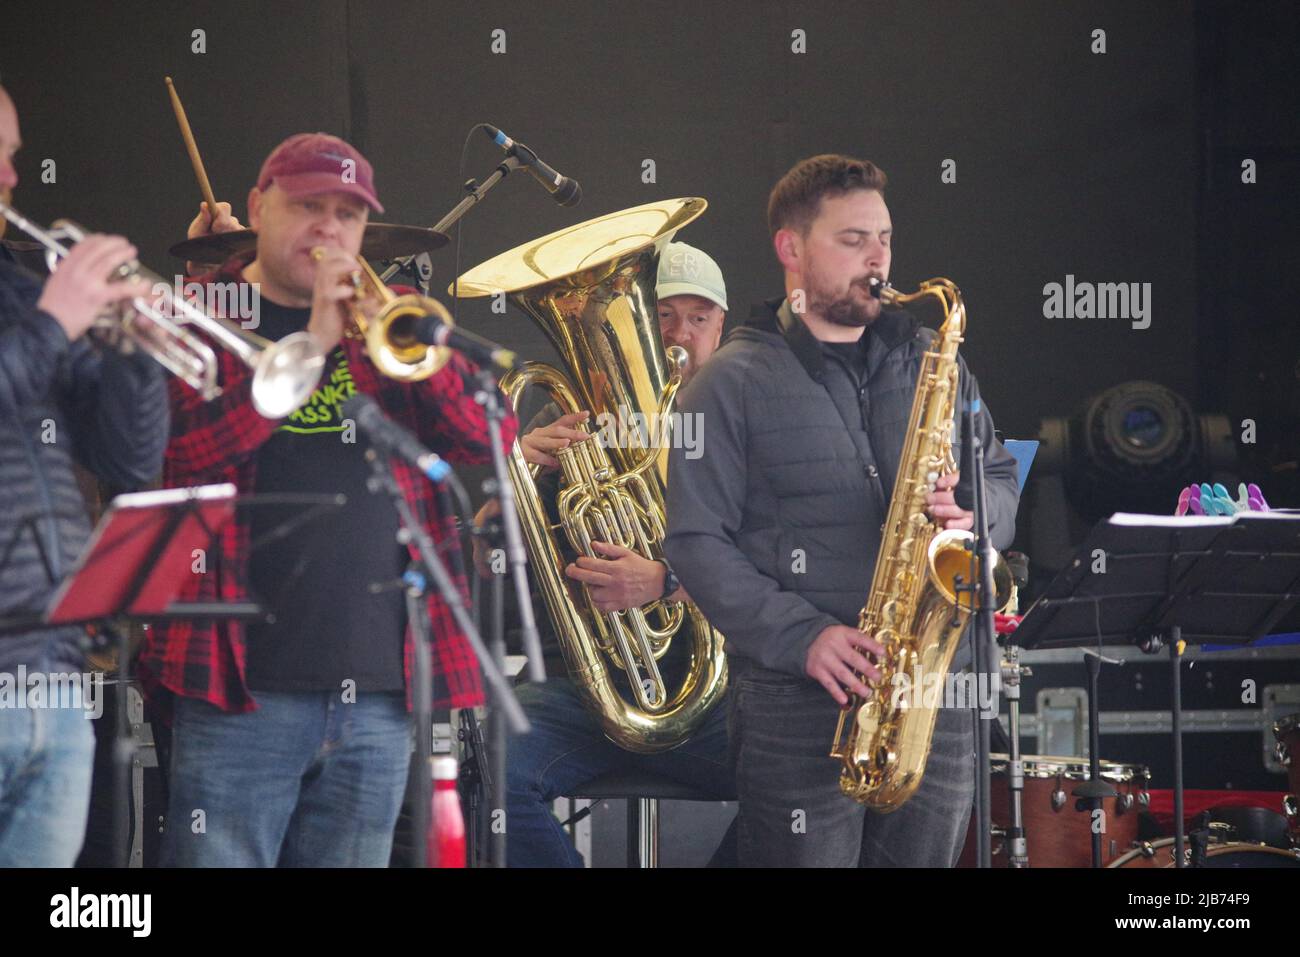 Wallsend, England, 2 June 2022. Northern Monkey Brass Band during a sound check at the Queen’s Platinum Jubilee event at Segedunum Roman Fort. Credit: Colin Edwards Stock Photo